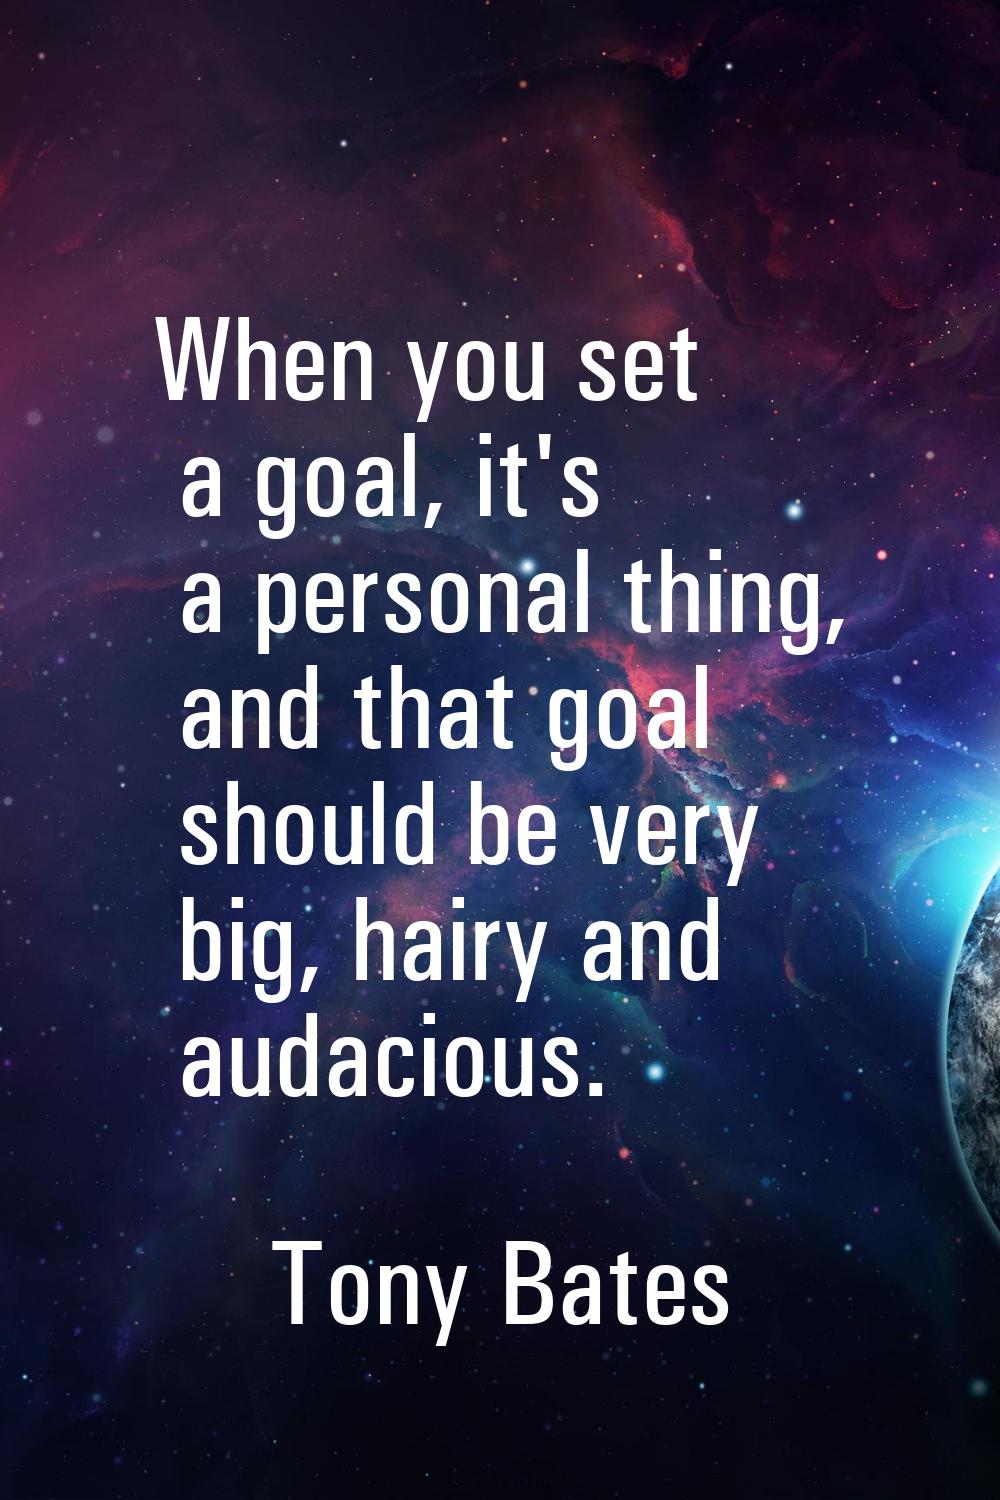 When you set a goal, it's a personal thing, and that goal should be very big, hairy and audacious.